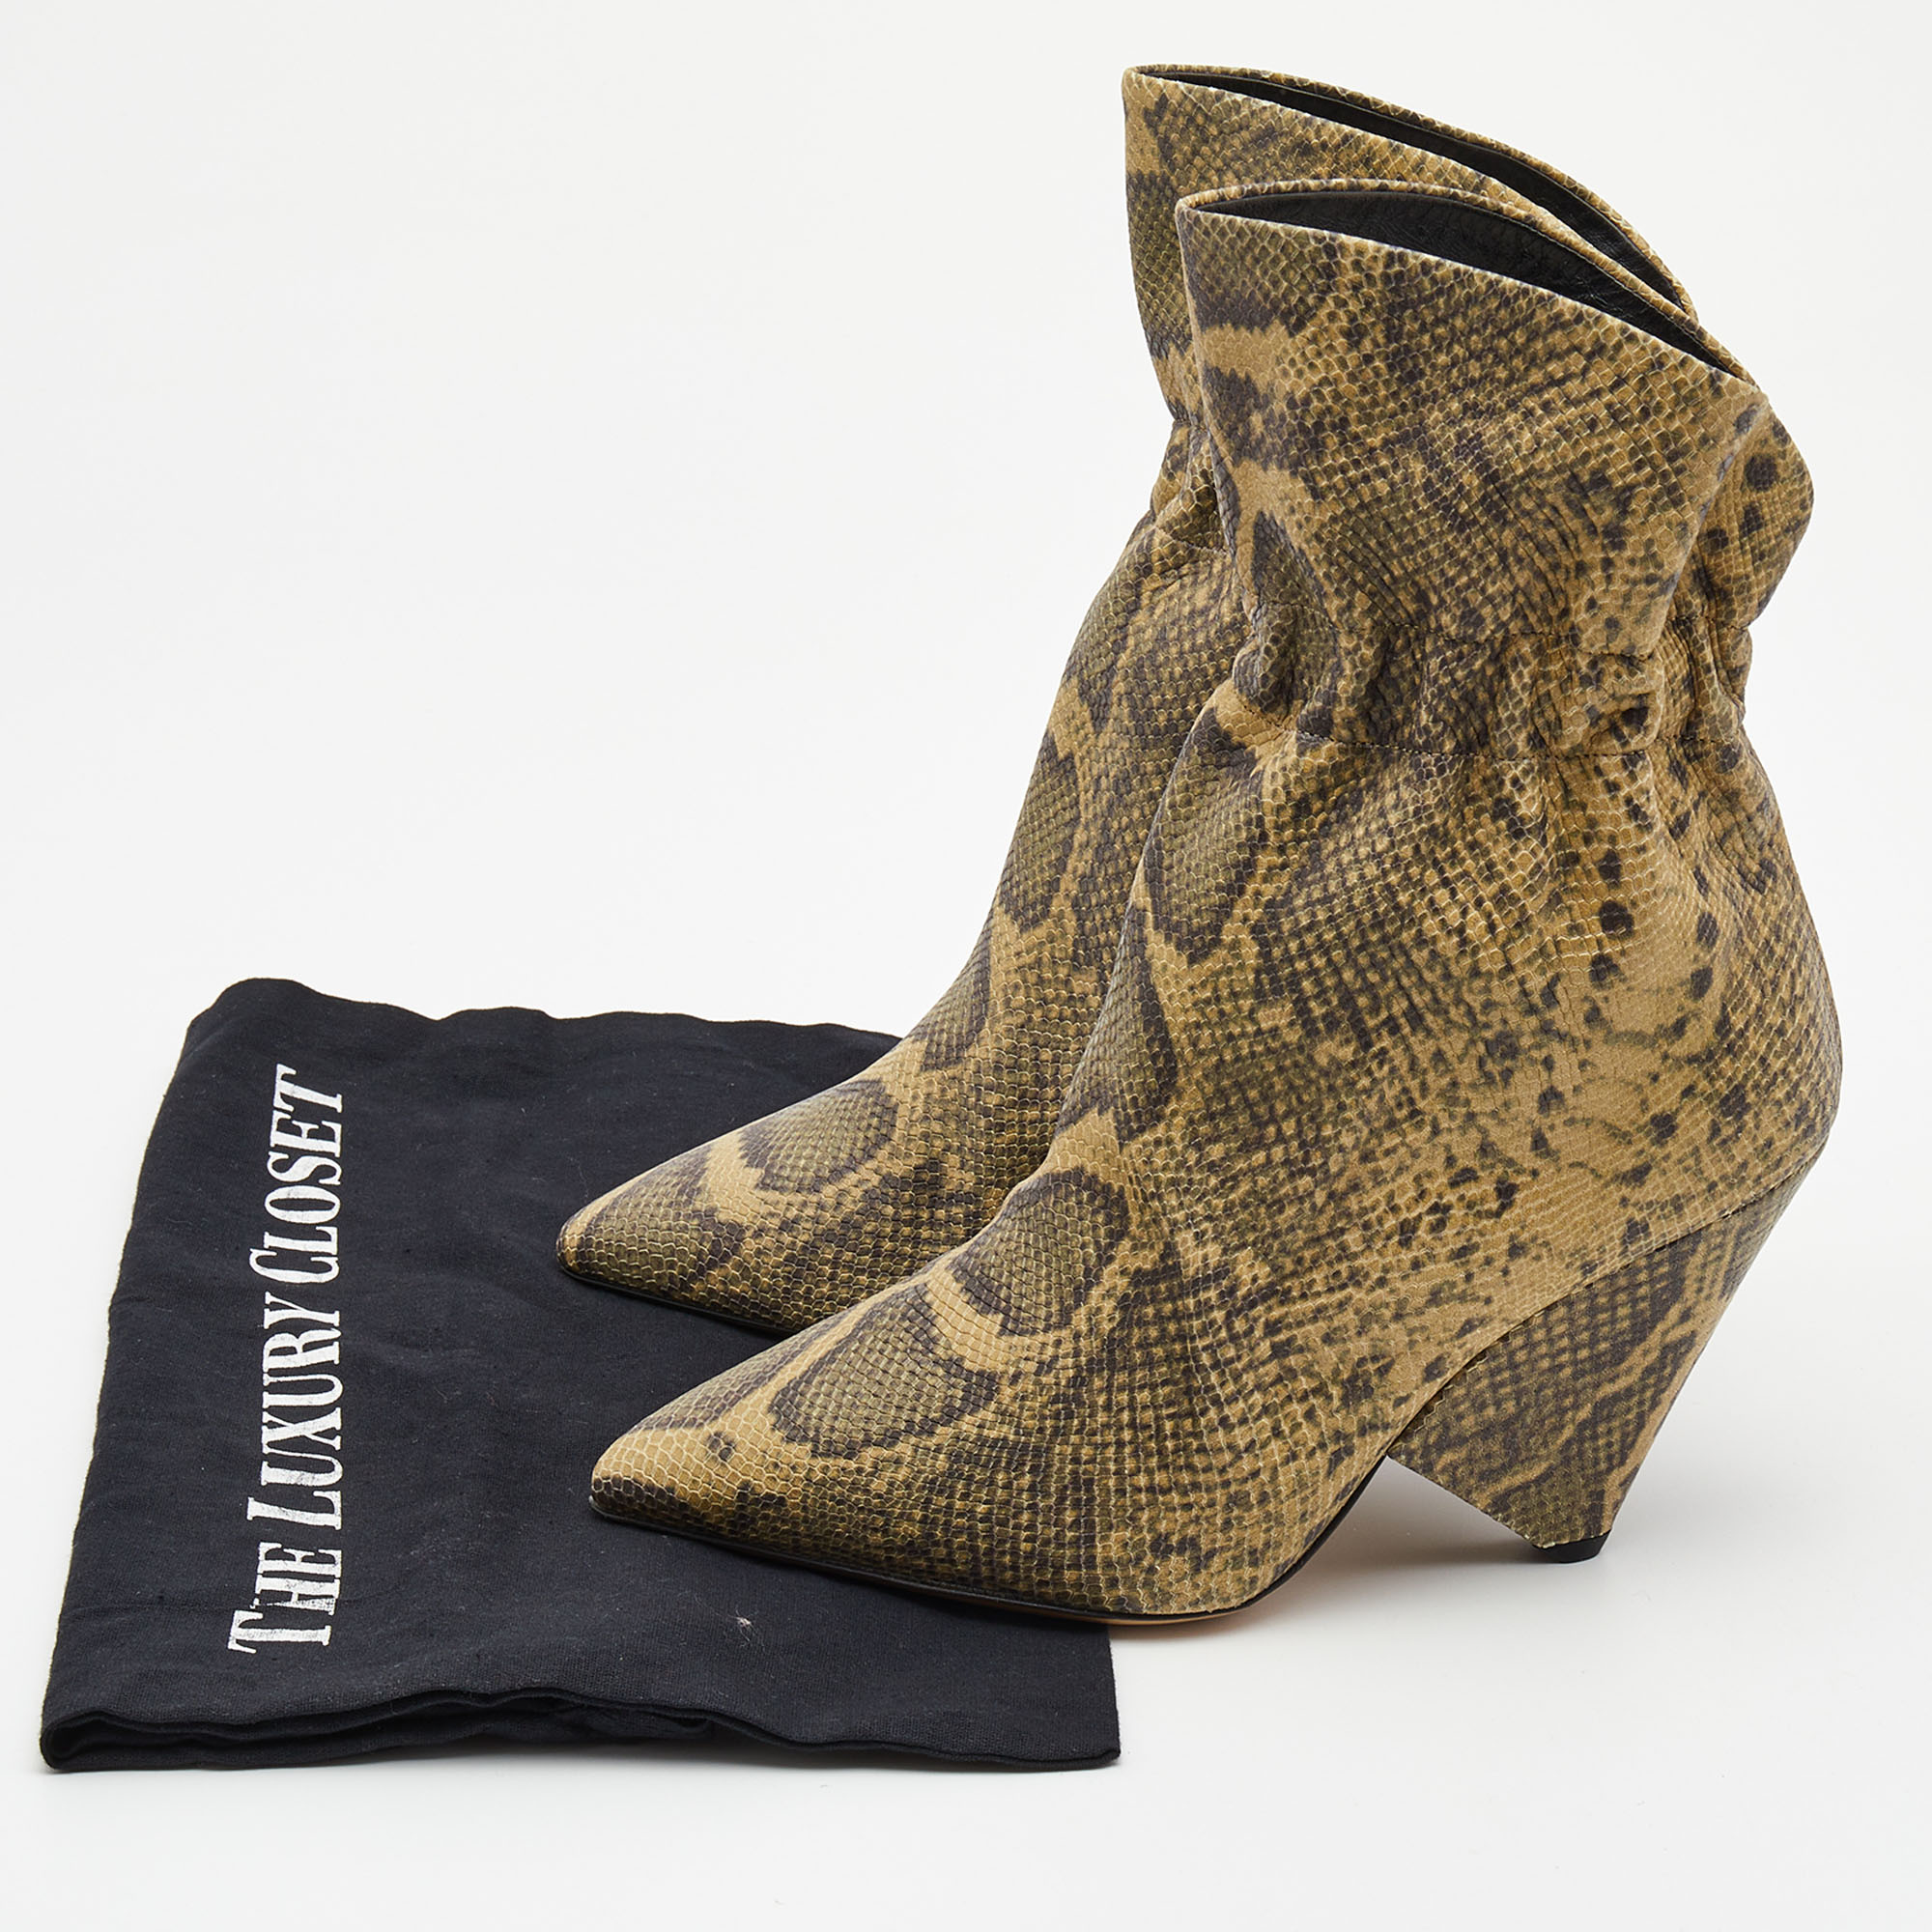 Isabel Marant Two Tone Python Embossed Leather Ankle Booties Size 38